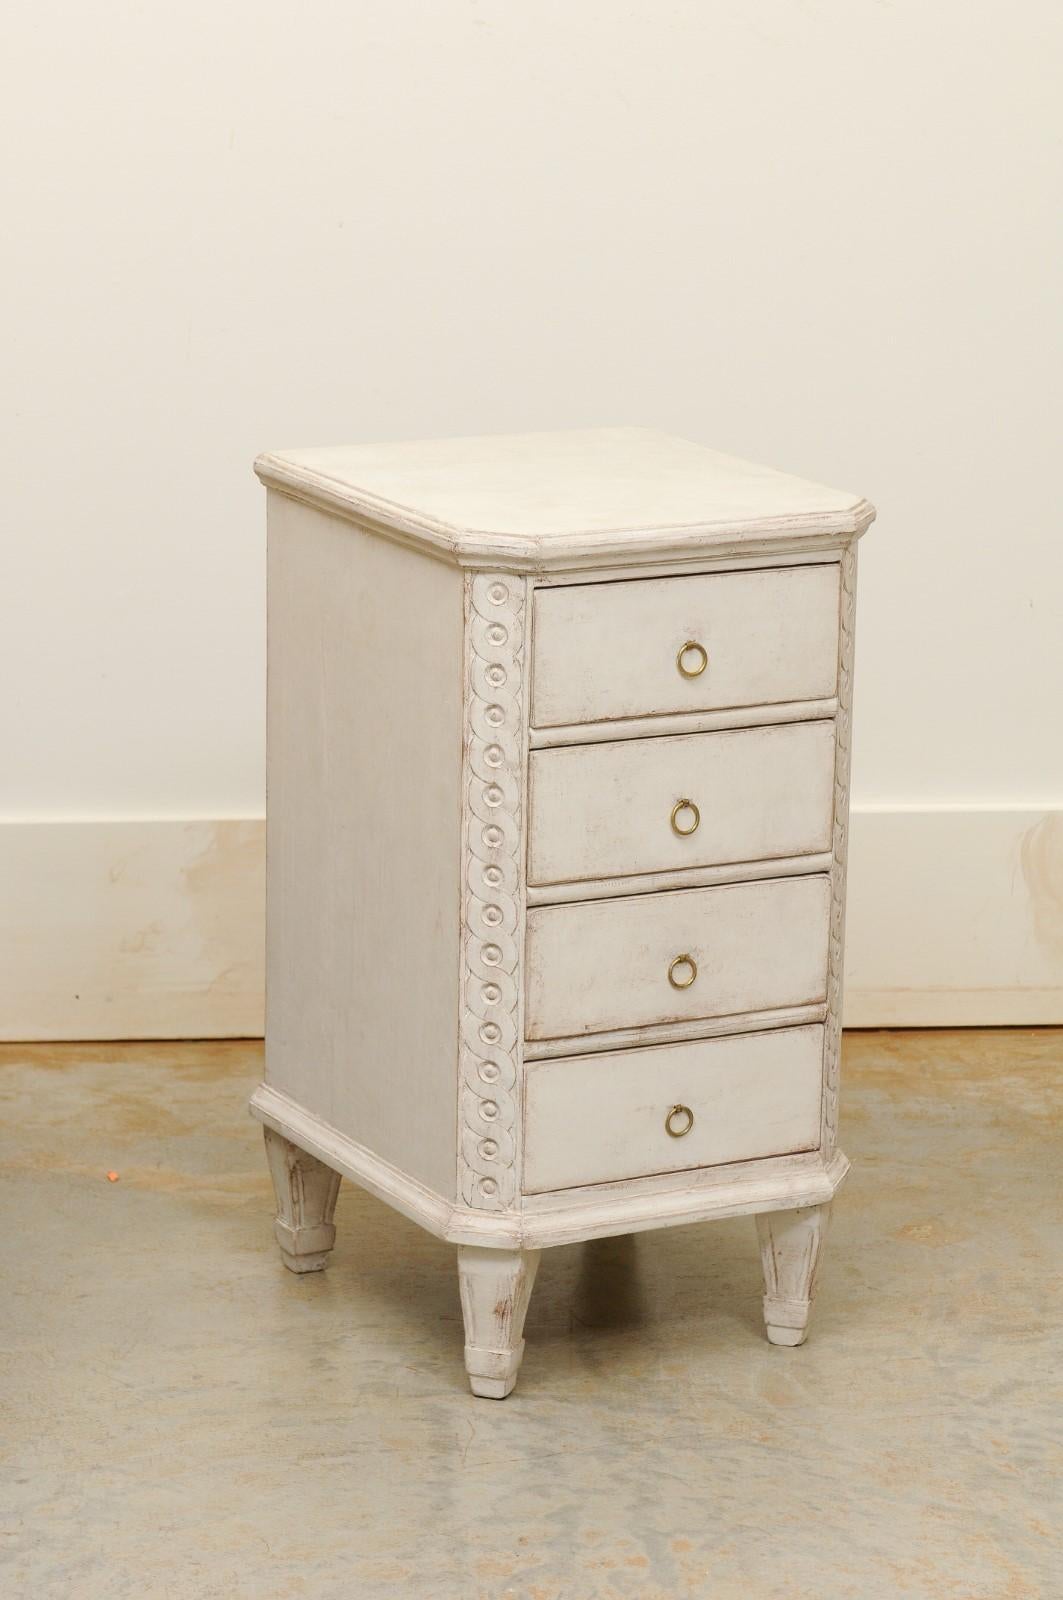 19th Century Pair of Swedish Neoclassical Style Painted Nightstand Tables with Guilloches